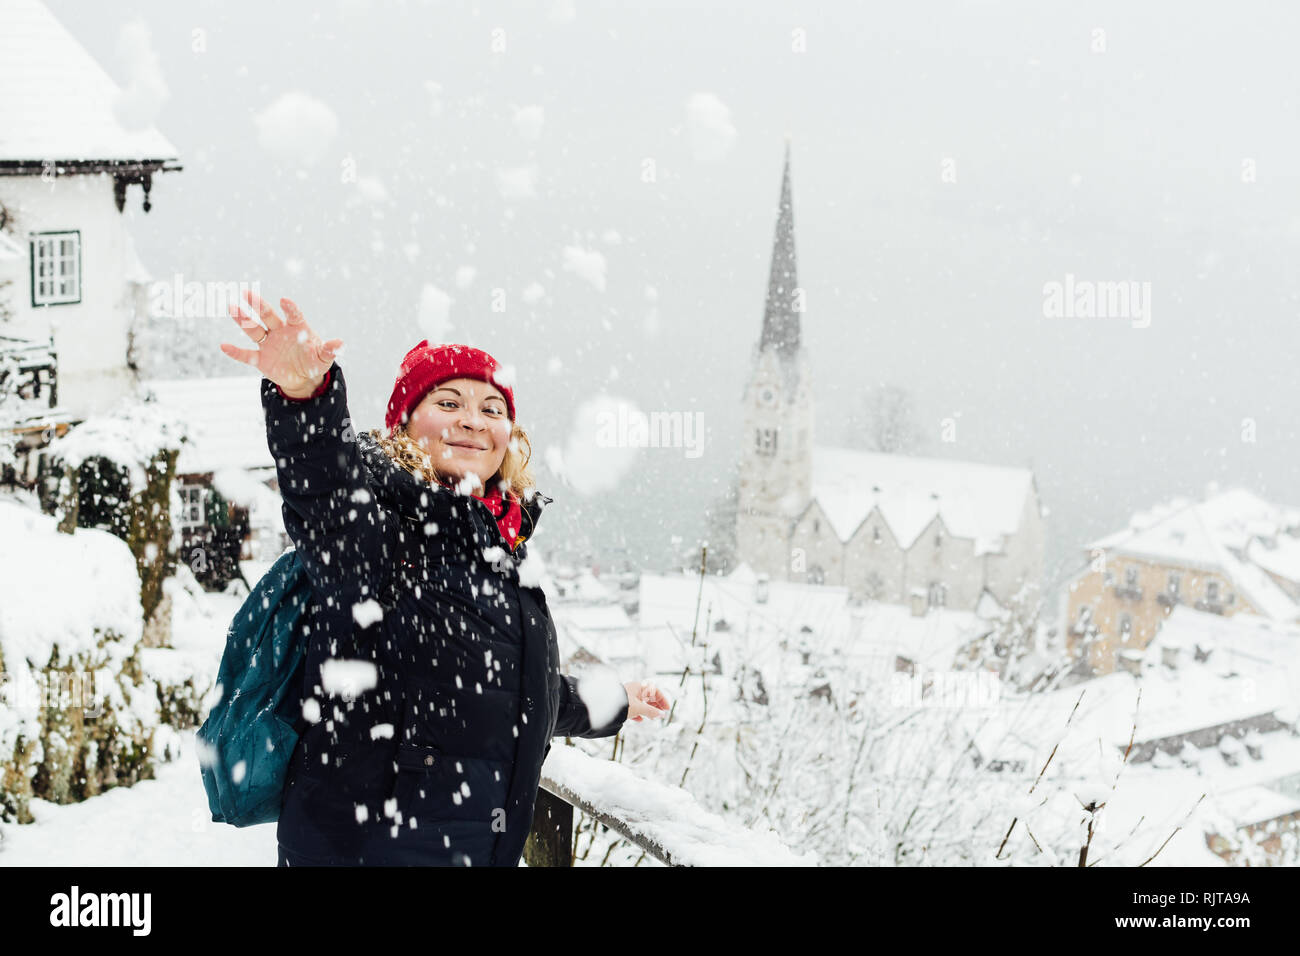 Woman in red hat having a snowball fight in Hallstatt old town during snow storm, Austria Stock Photo